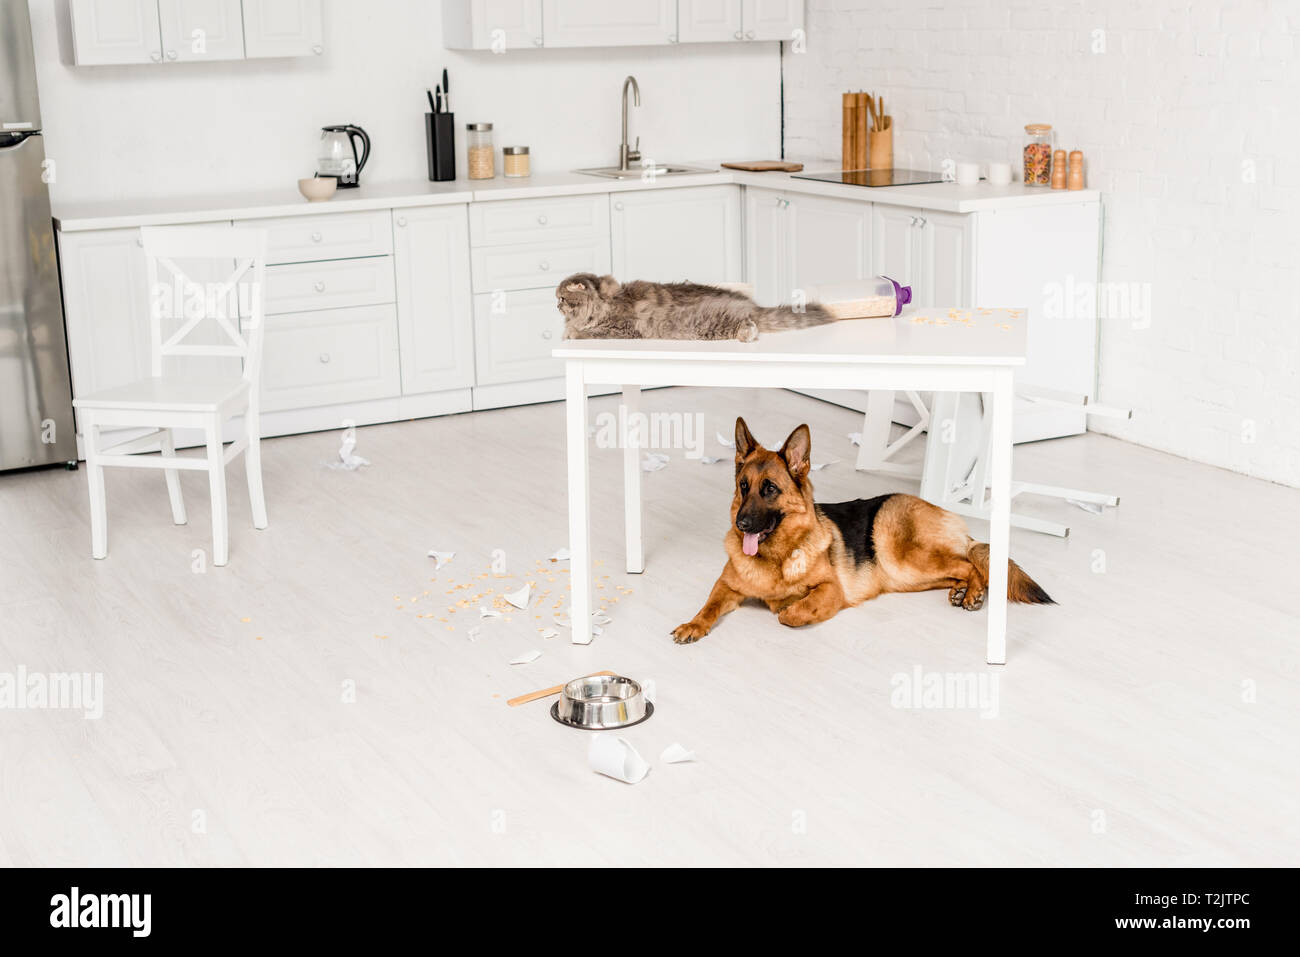 cute and grey cat lying on white table and German Shepherd lying on floor in messy kitchen Stock Photo